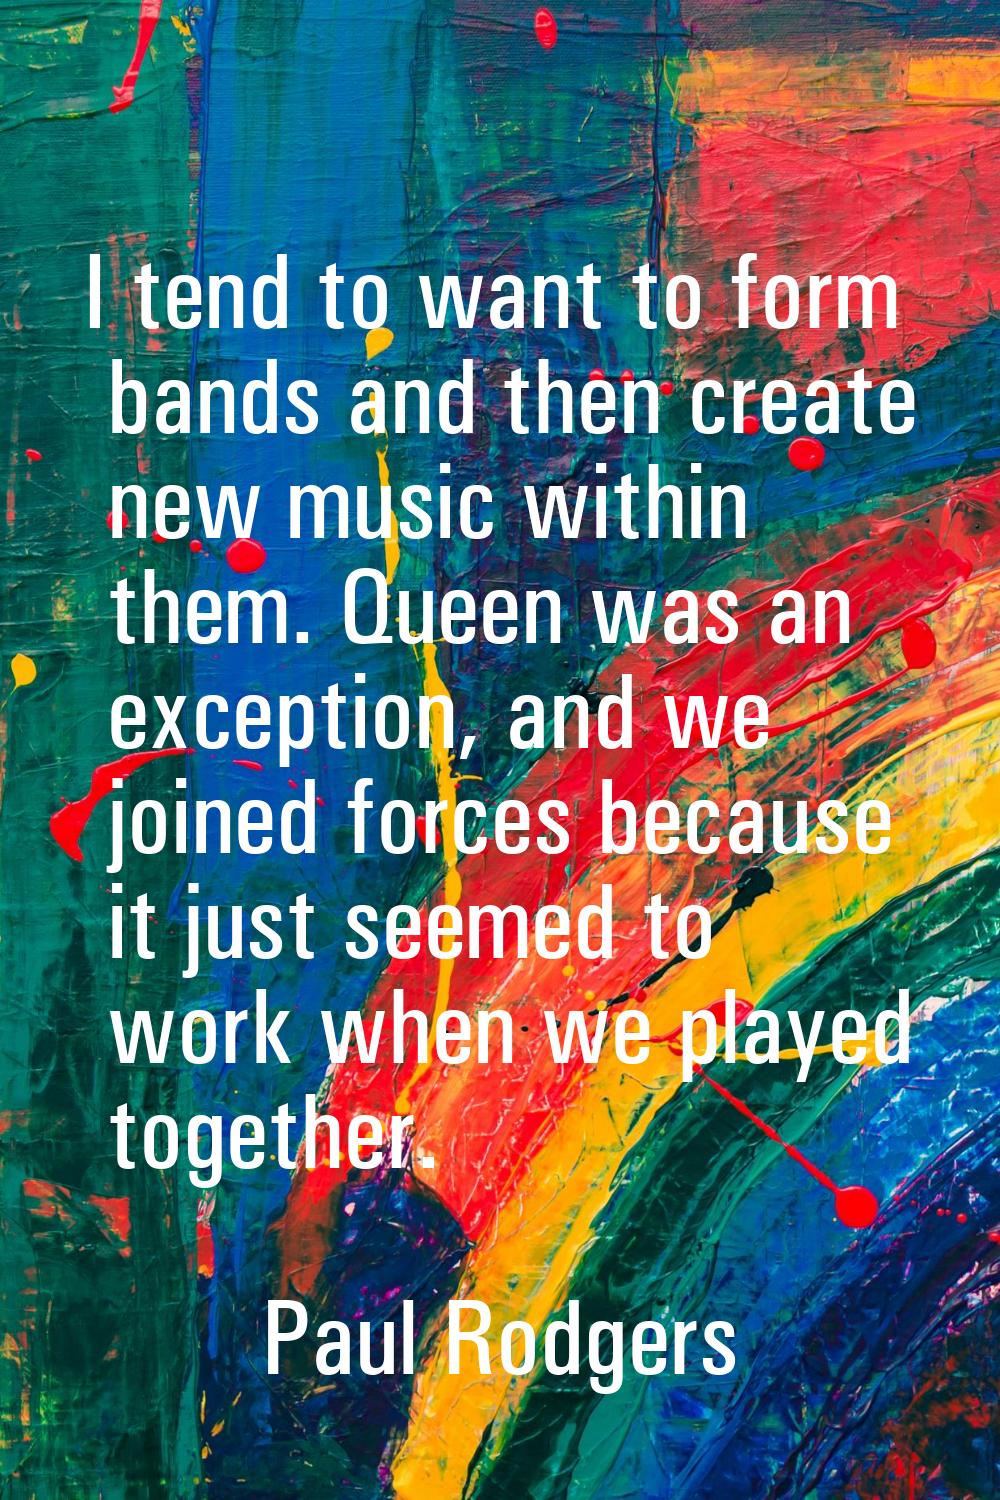 I tend to want to form bands and then create new music within them. Queen was an exception, and we 